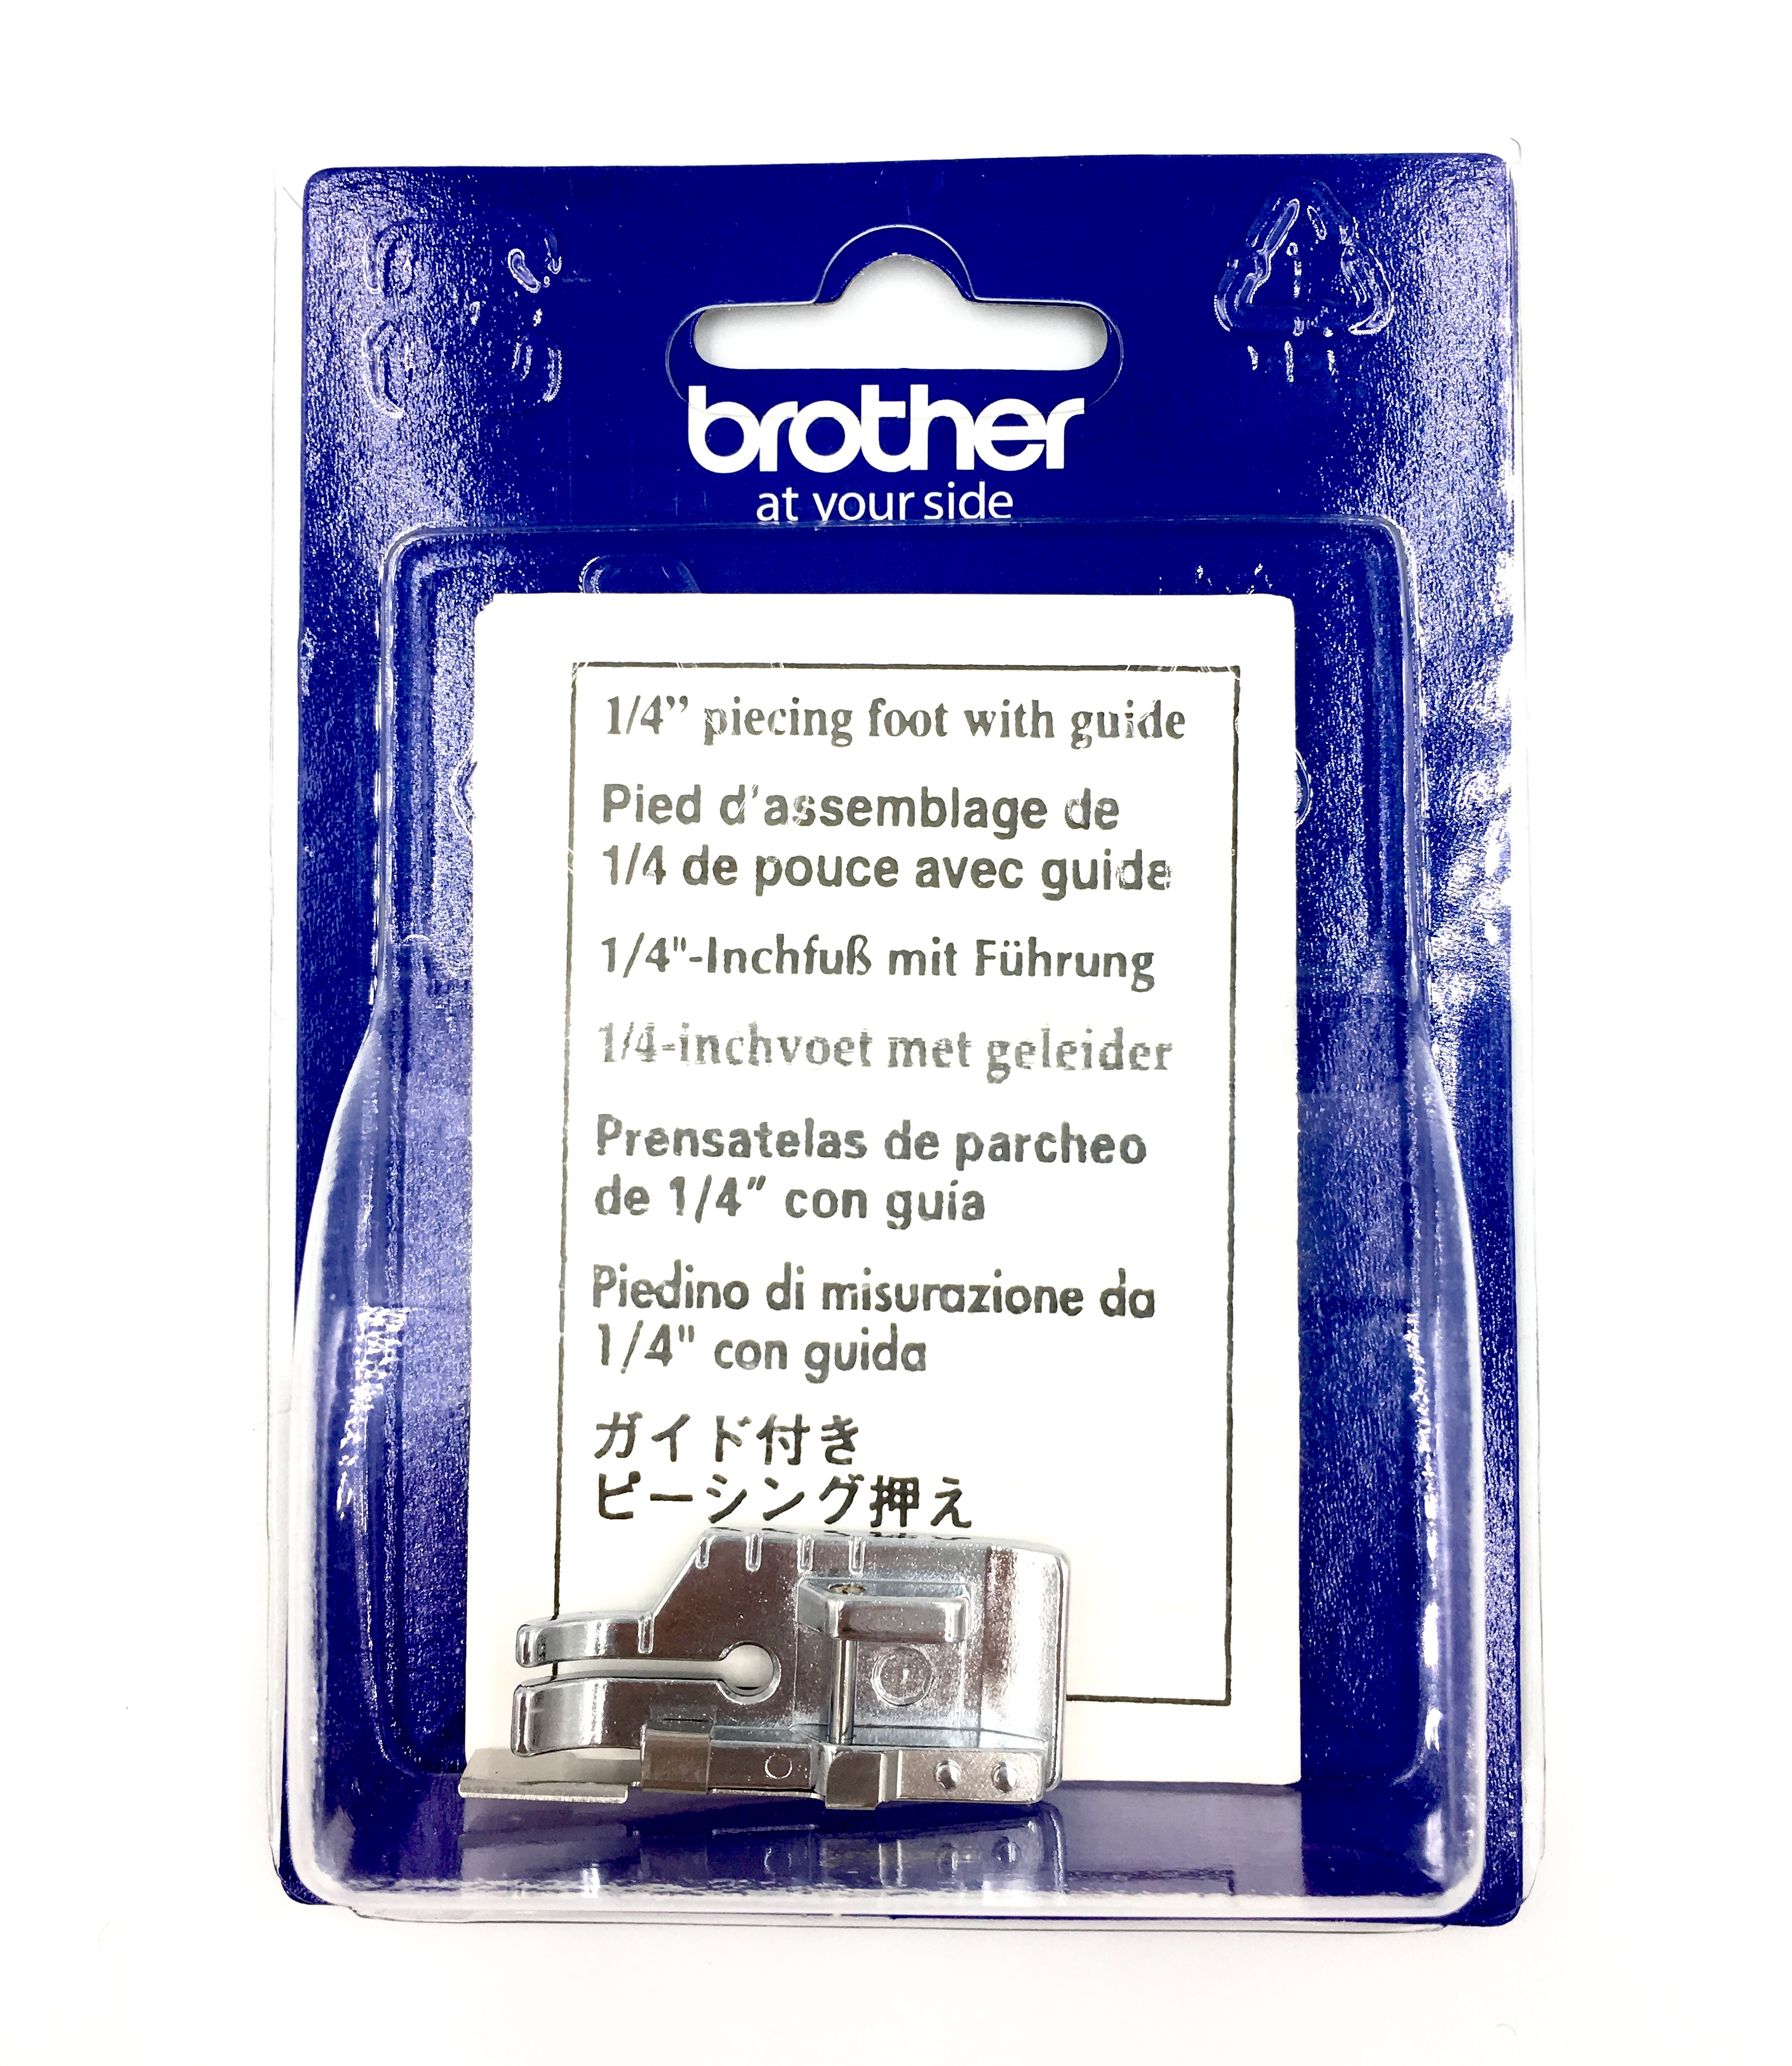 1/4 Piecing Foot with guide F057 - Genuine Brother